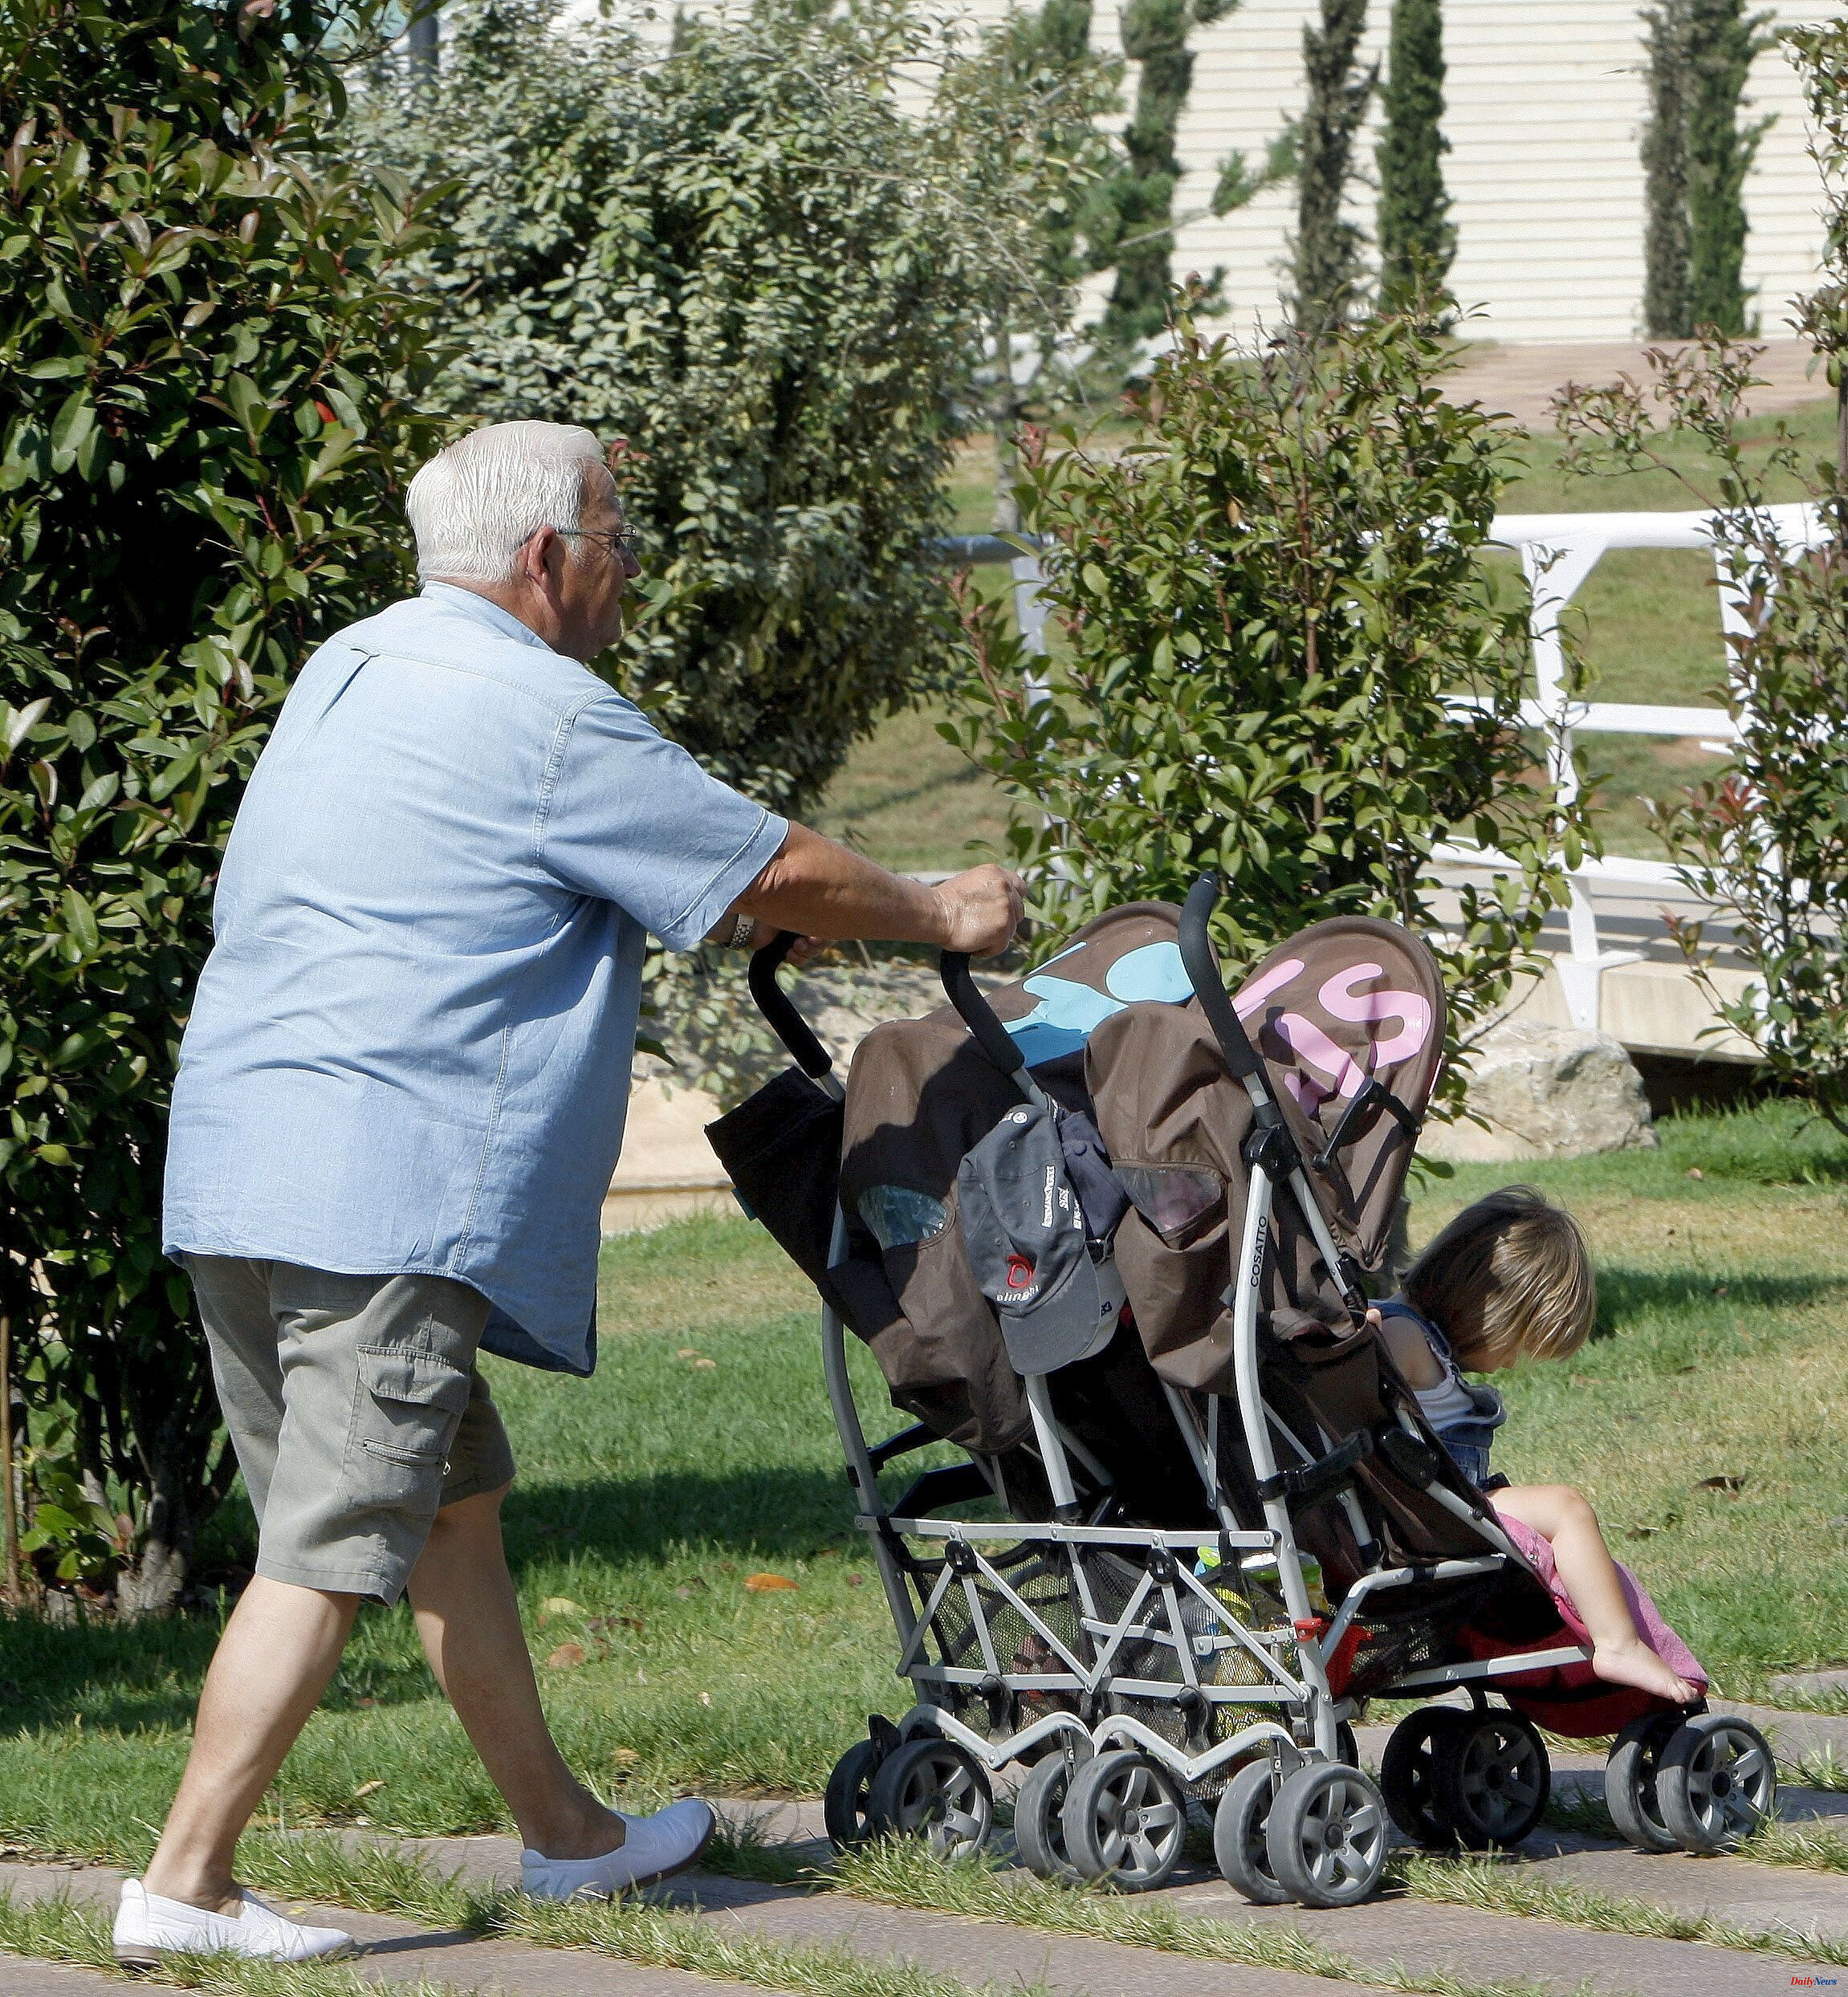 Italy The Italian Justice determines that "children cannot be forced to see their grandparents"